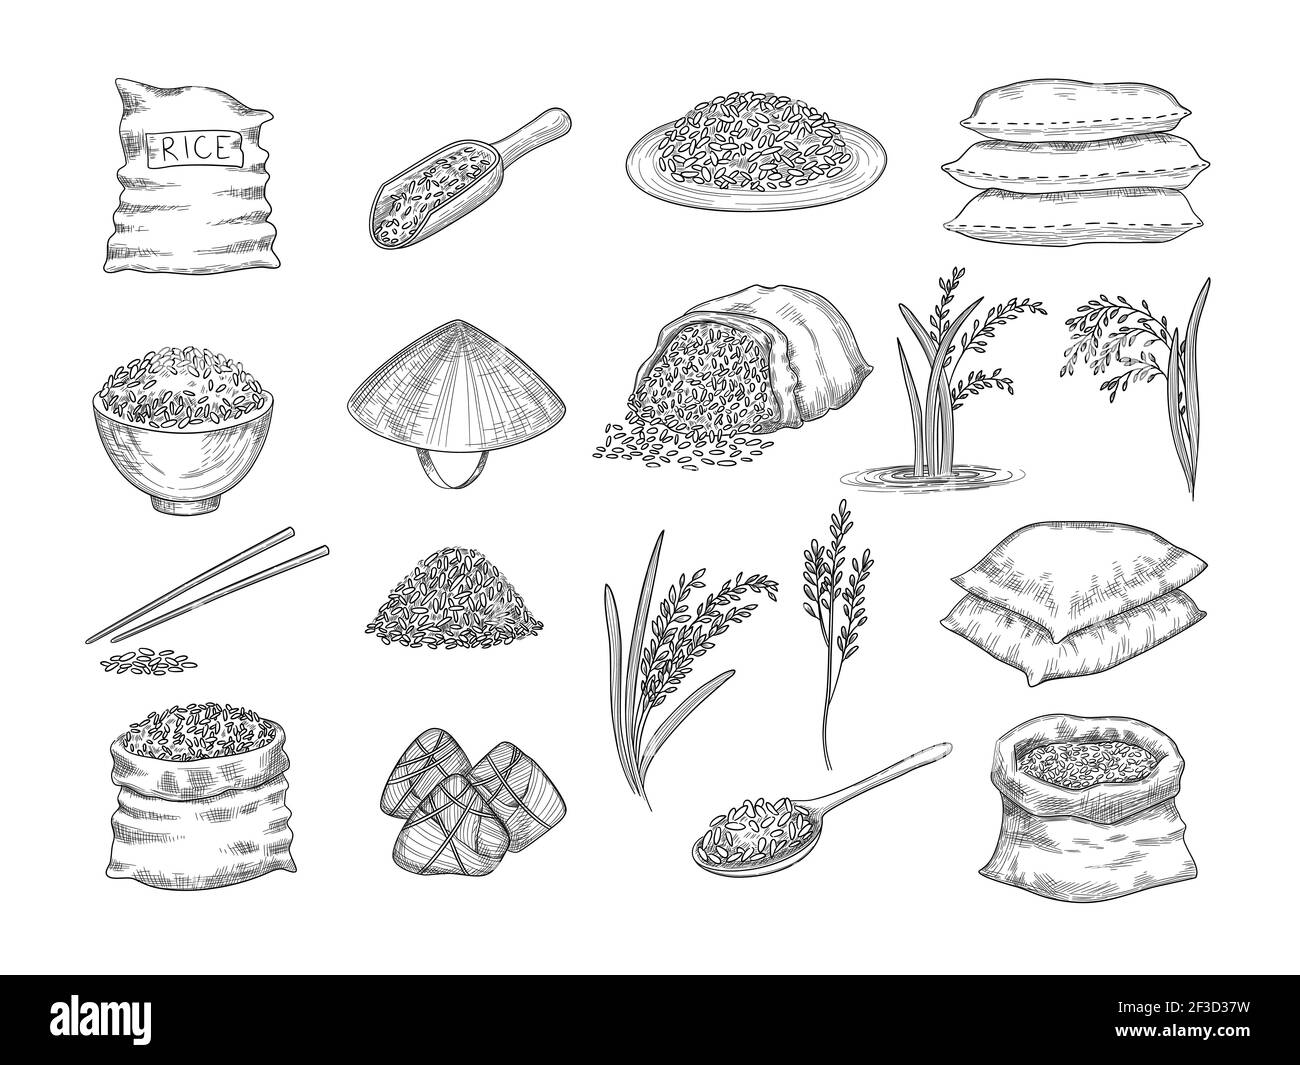 Rice sacks. Natural agriculture objects wheat grains rice food vector hand drawn collection Stock Vector